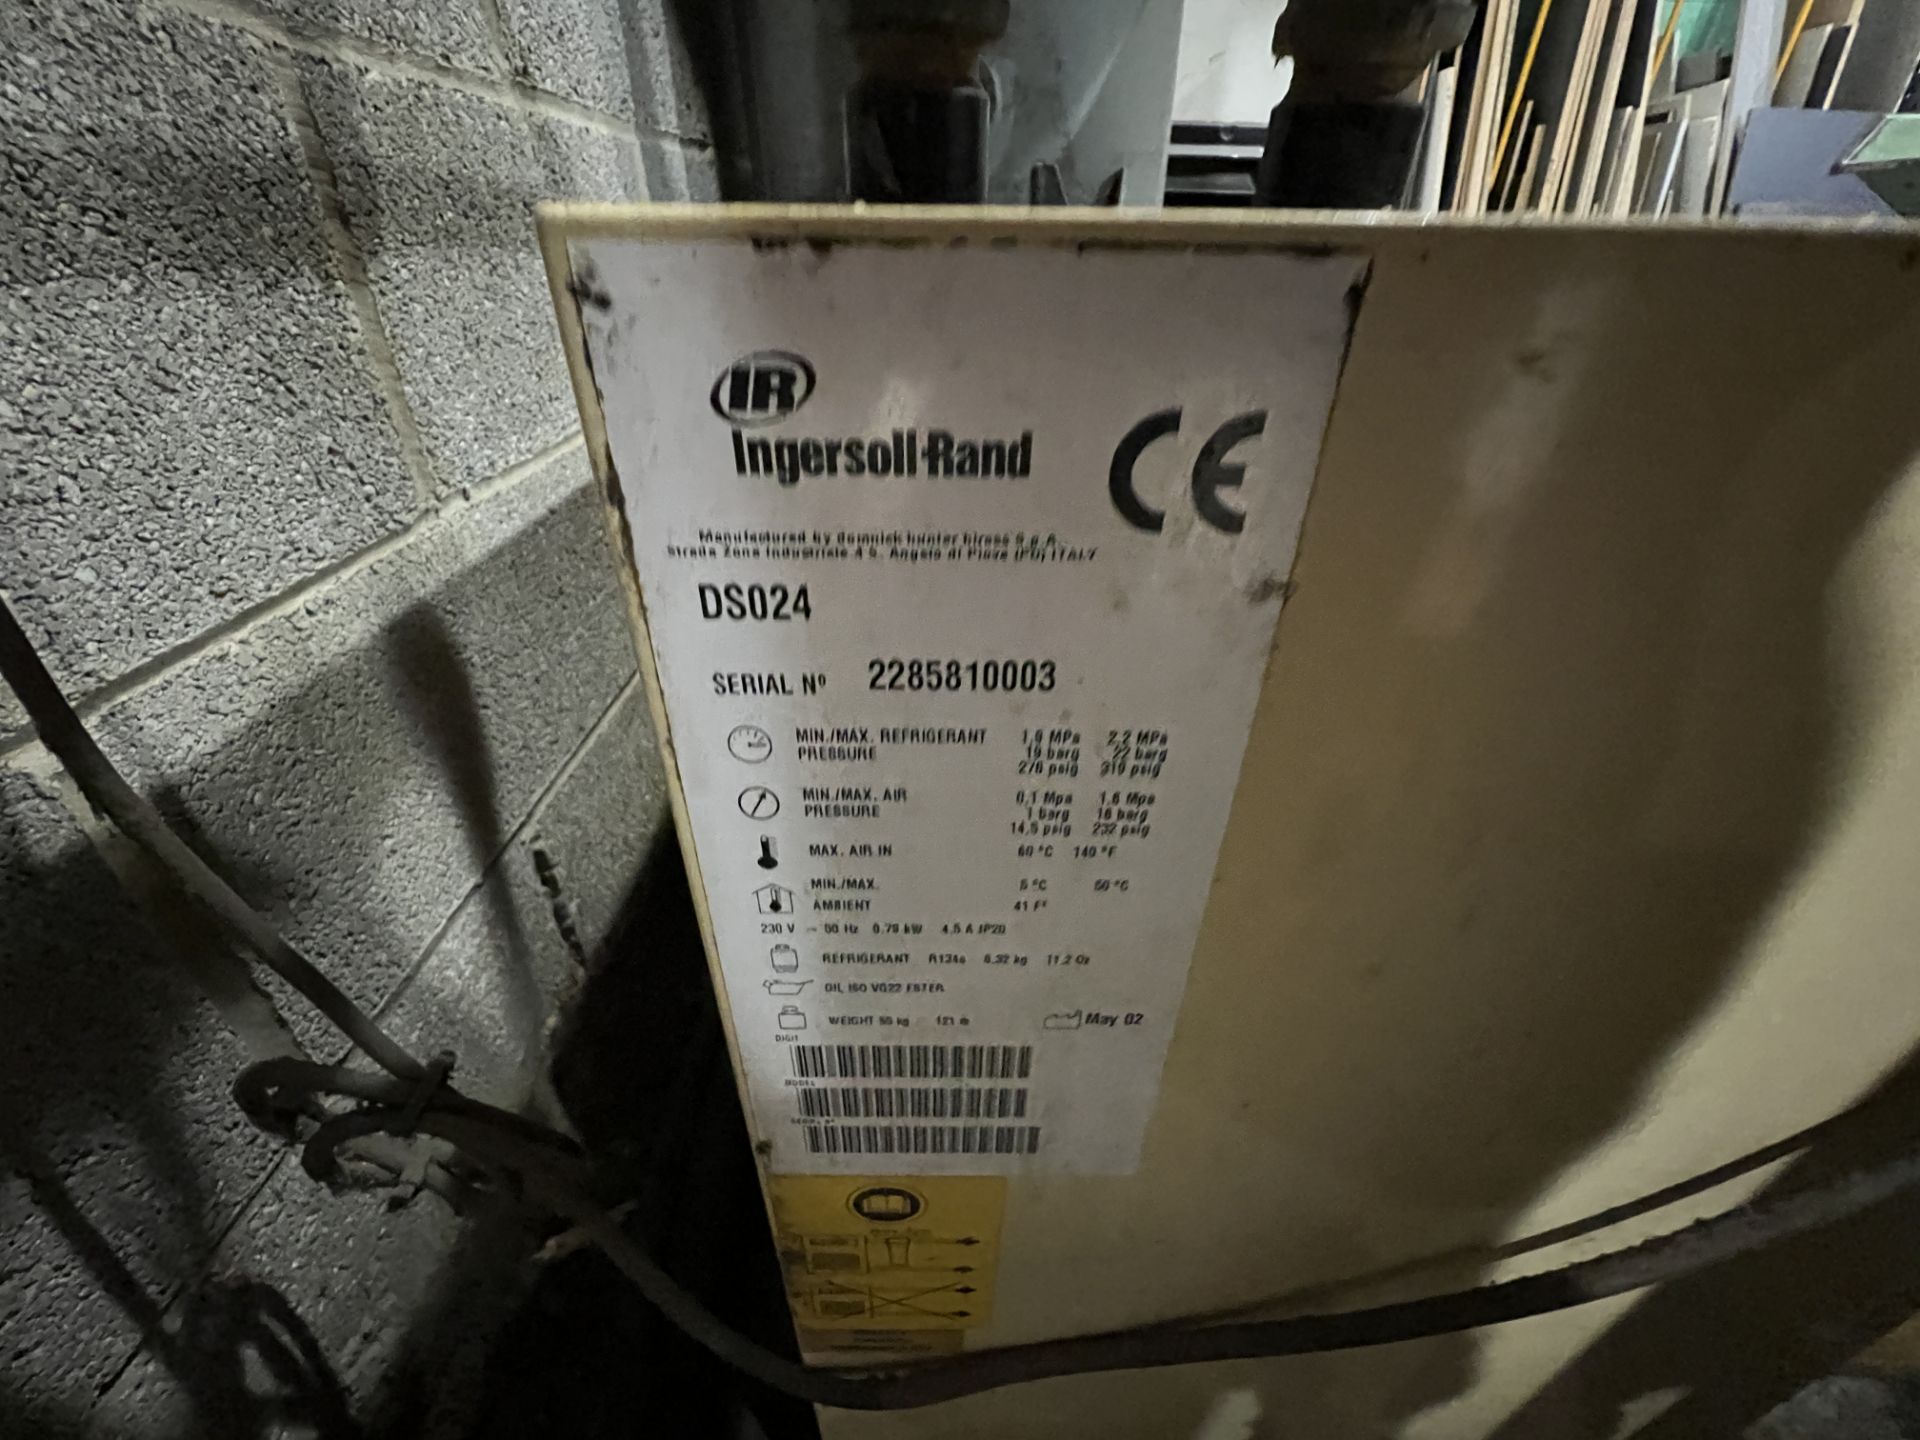 Radnal Pneumatics 340 Lts welded vertical air receiver tank with Ingersoll Rand DS024 air dryer , - Image 5 of 7